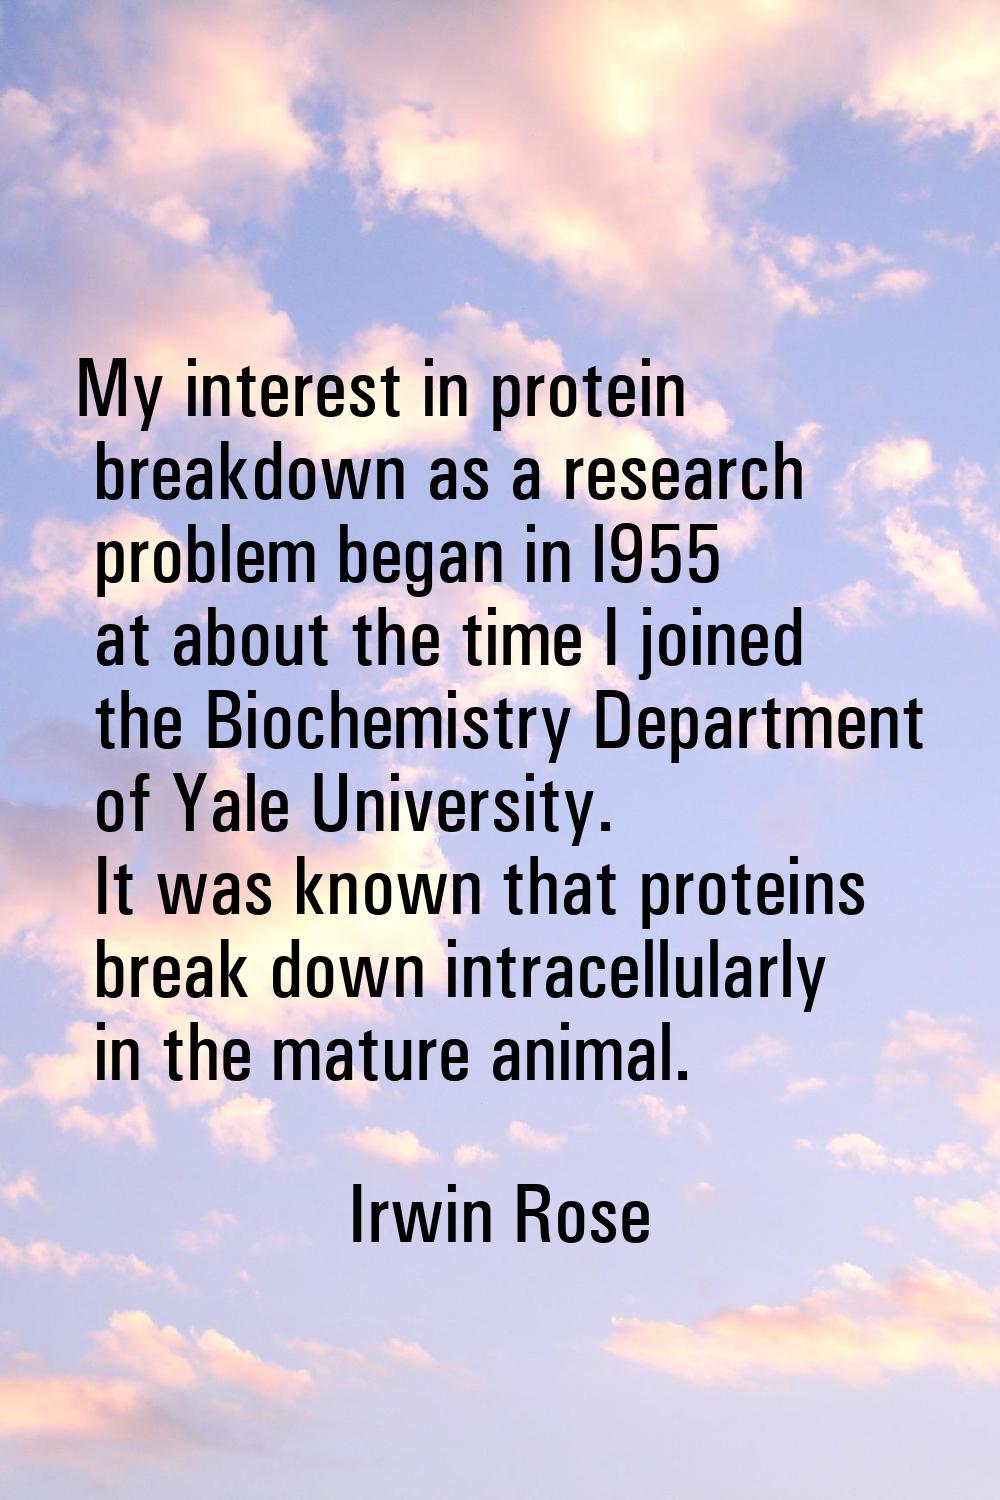 My interest in protein breakdown as a research problem began in l955 at about the time I joined the